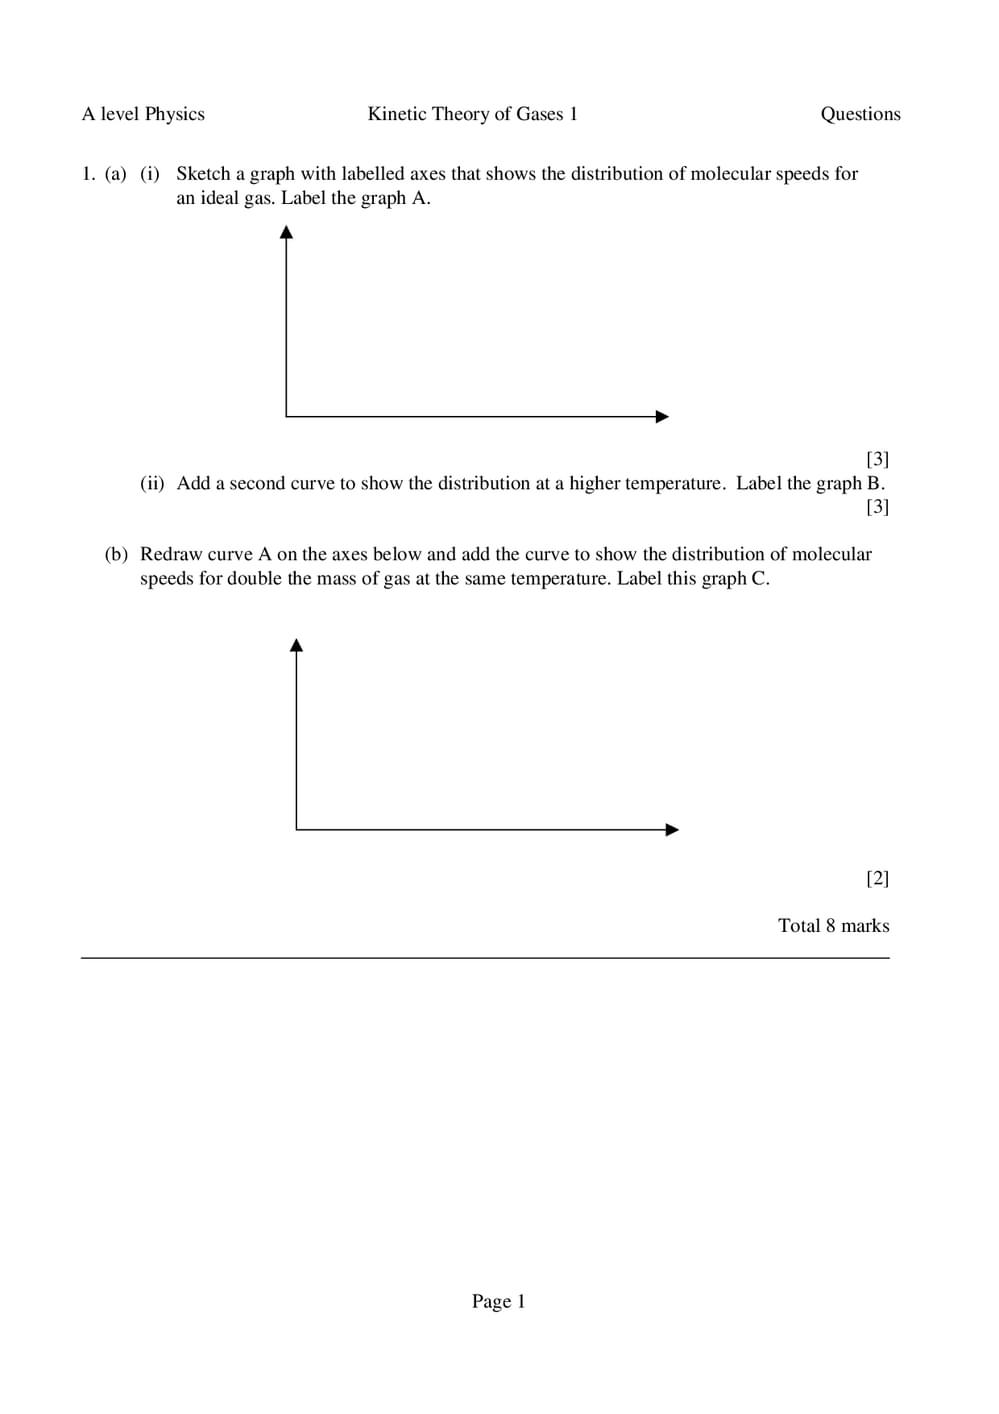 Al Kinetic Theory Questions 1